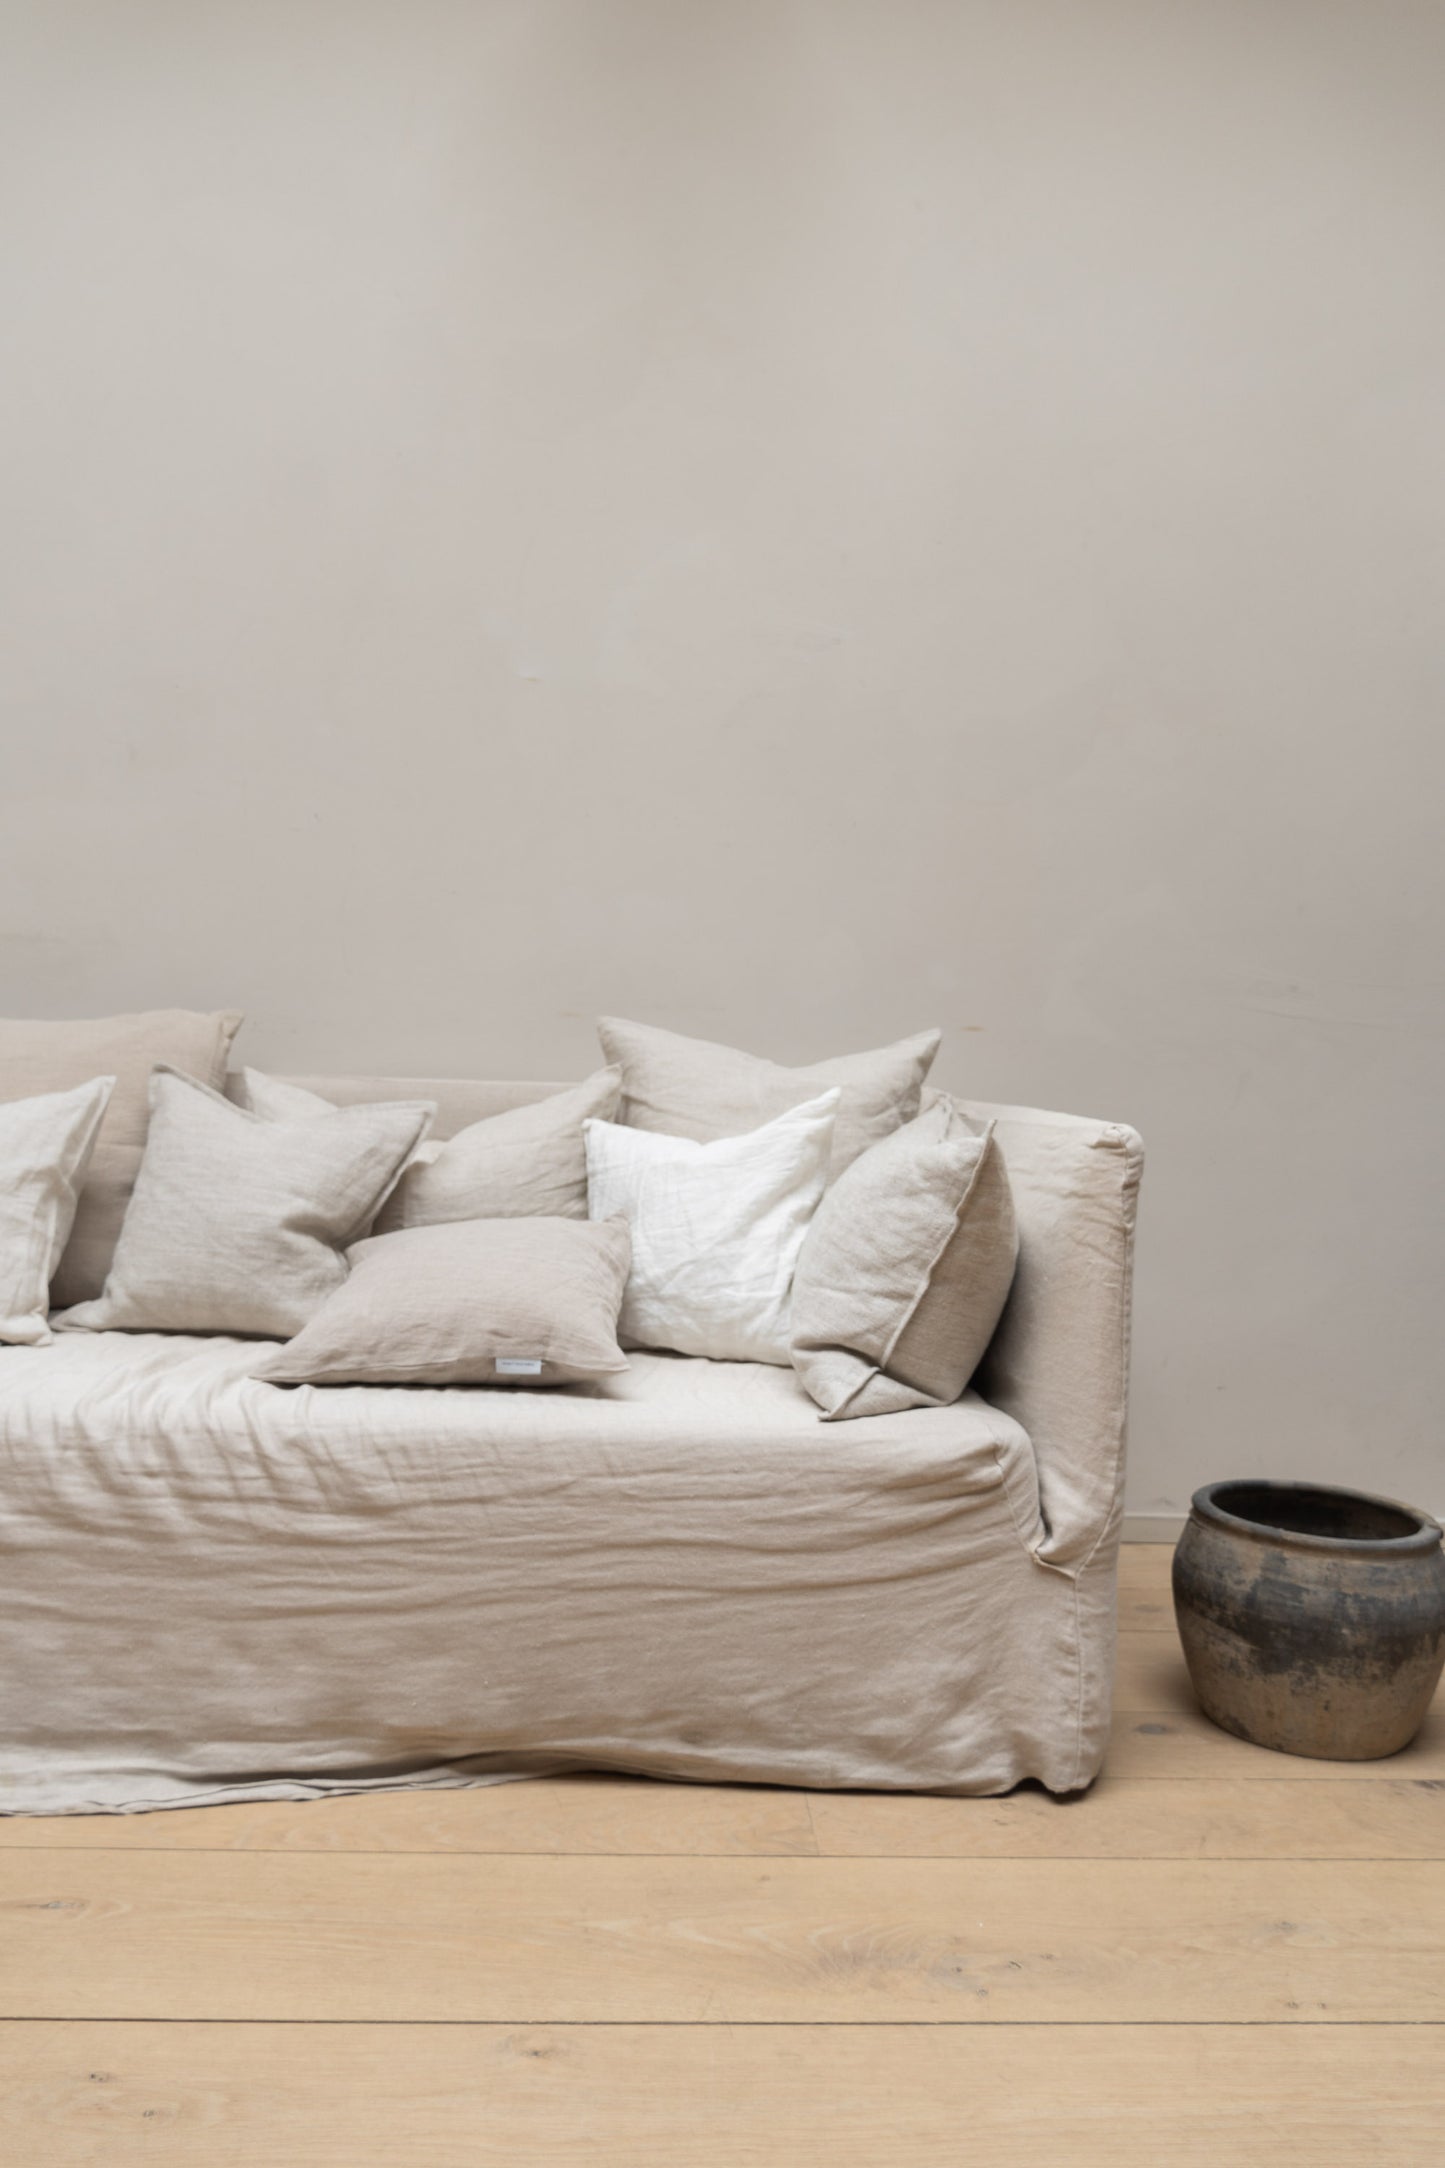 Linen Cushions by Timeless Linen set on couch in a light and neutral interior at Enter The Loft.